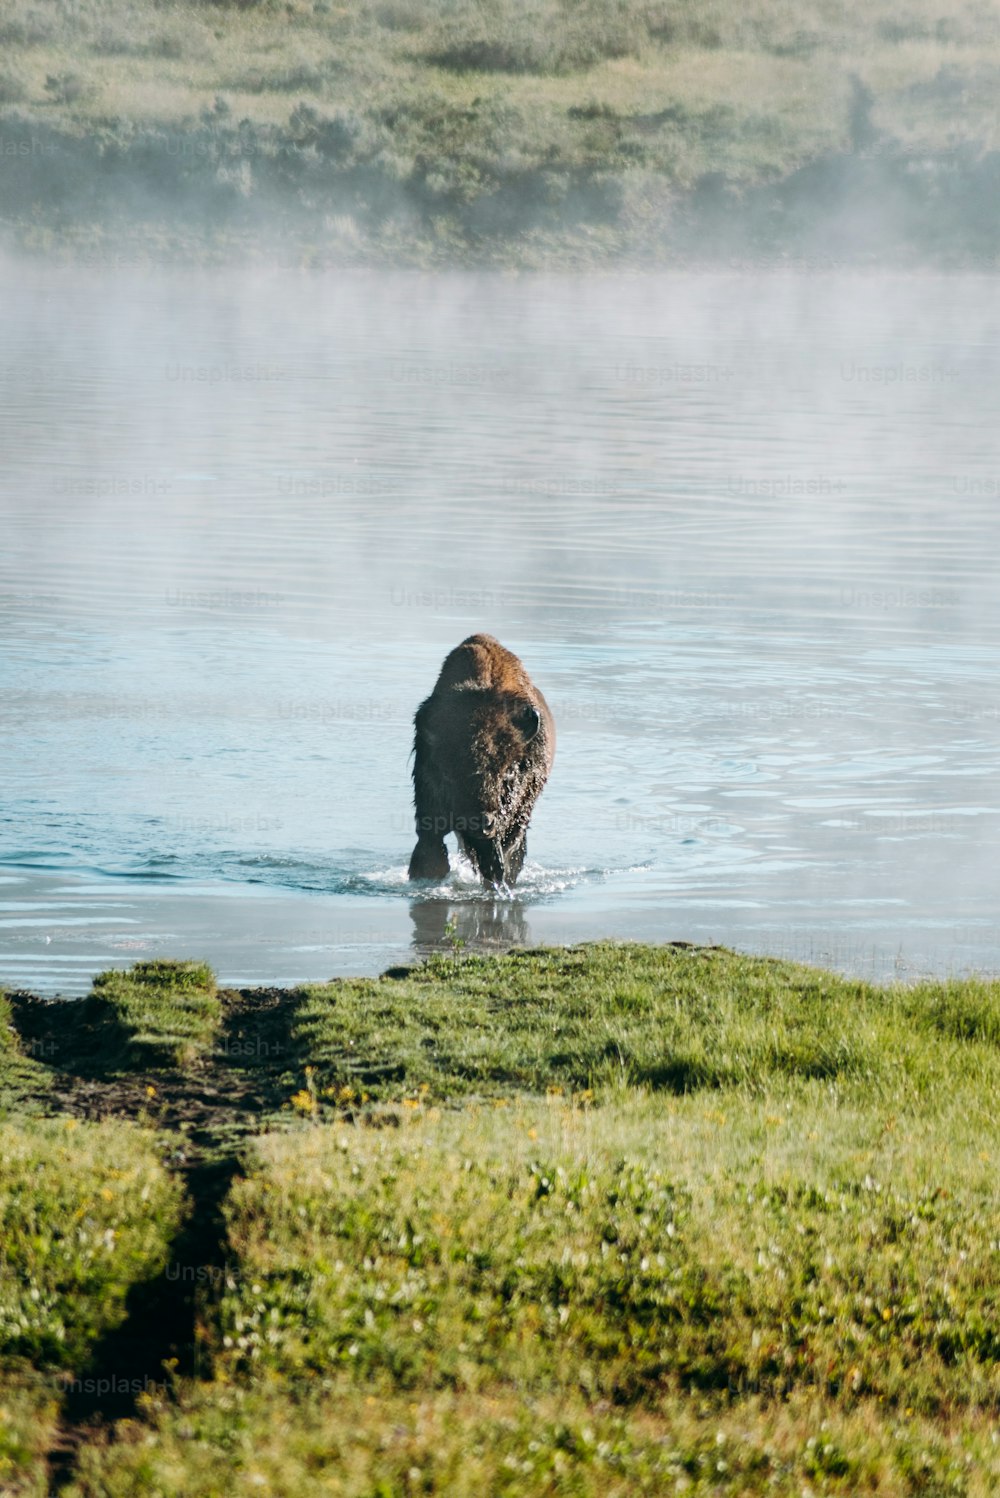 a bison is wading in a body of water